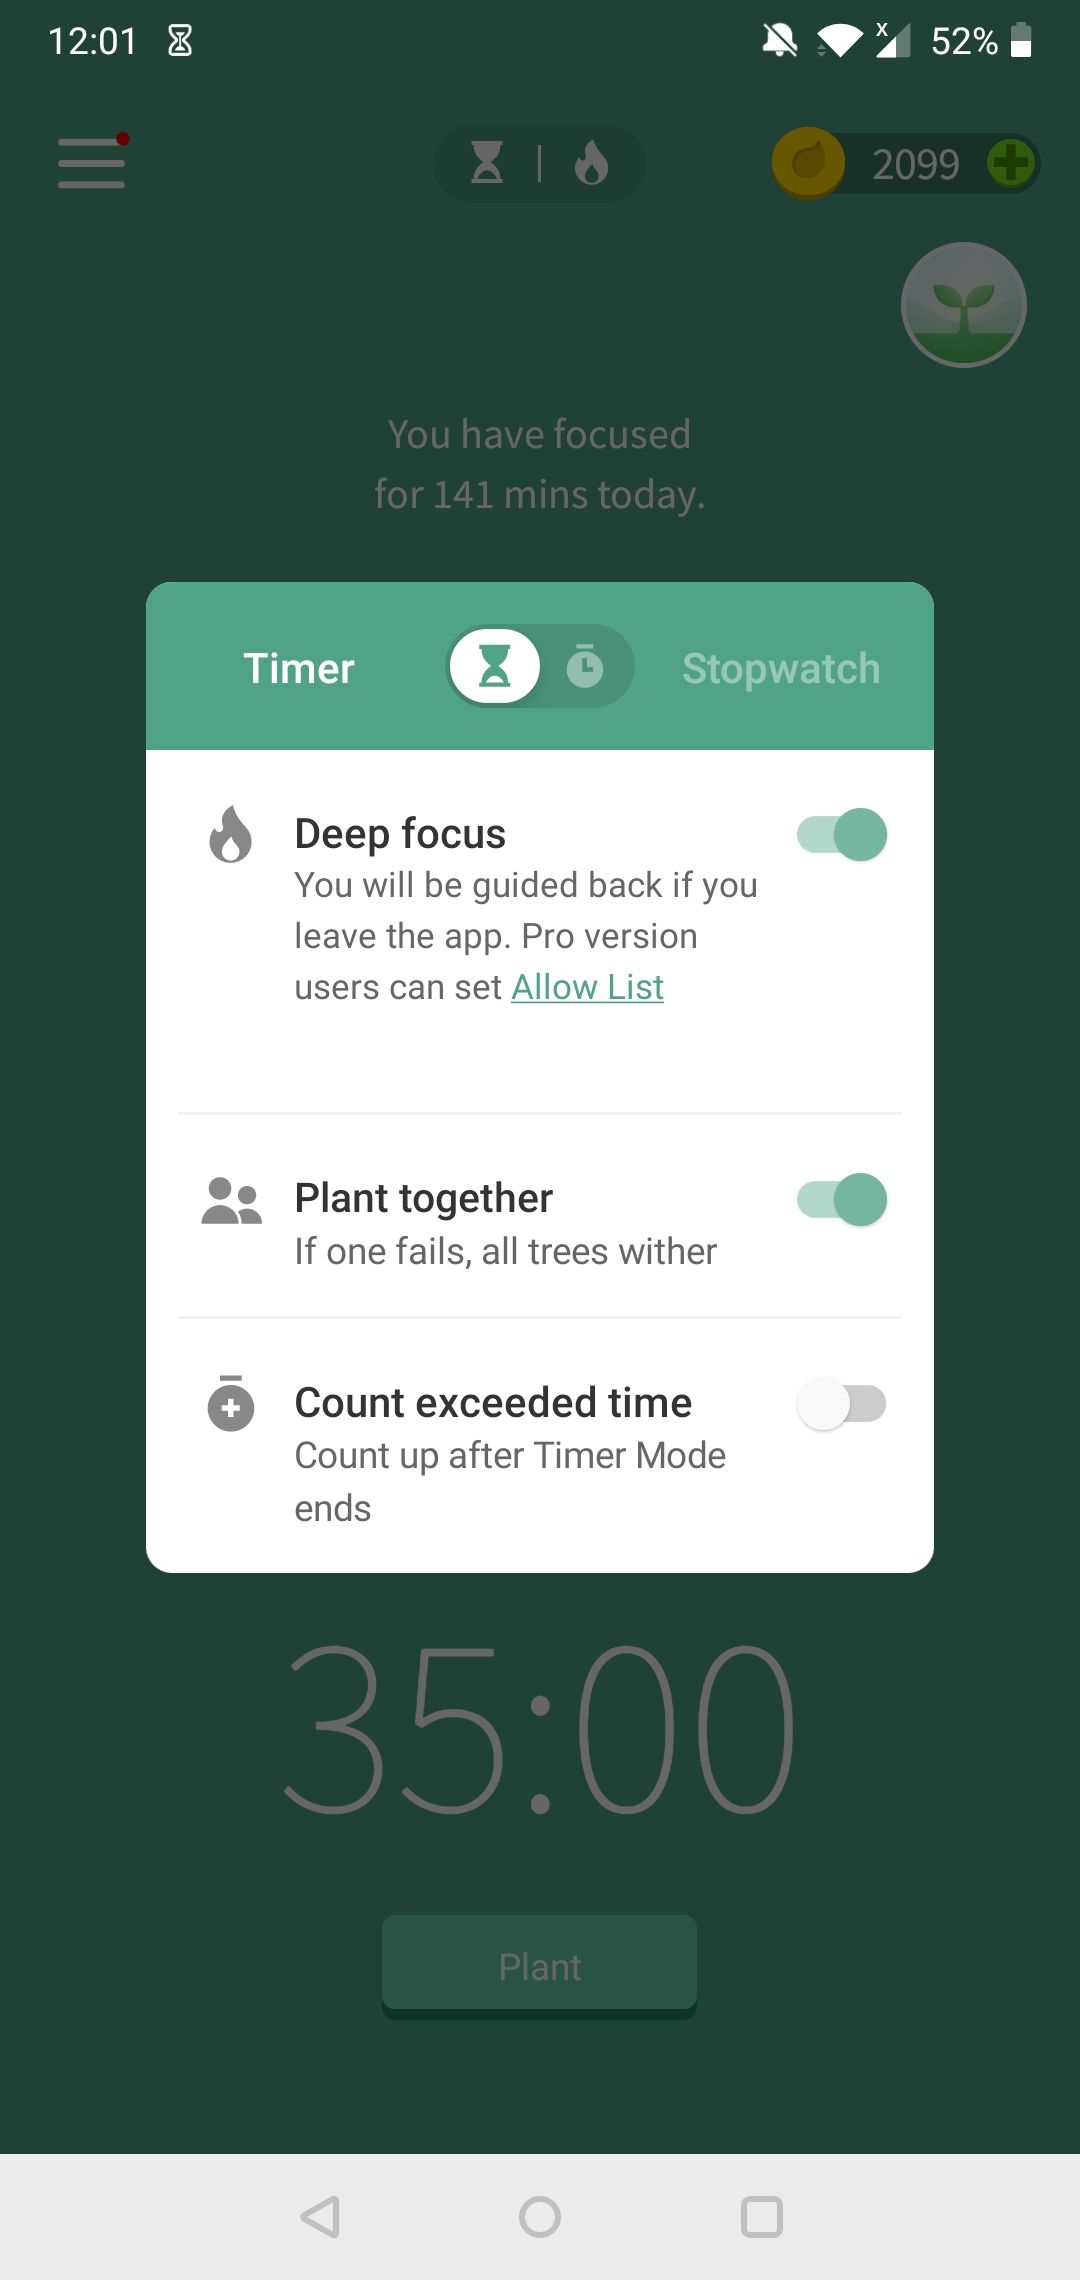 "Deep focus" and "Plant together" enabled on the Forest Android app.